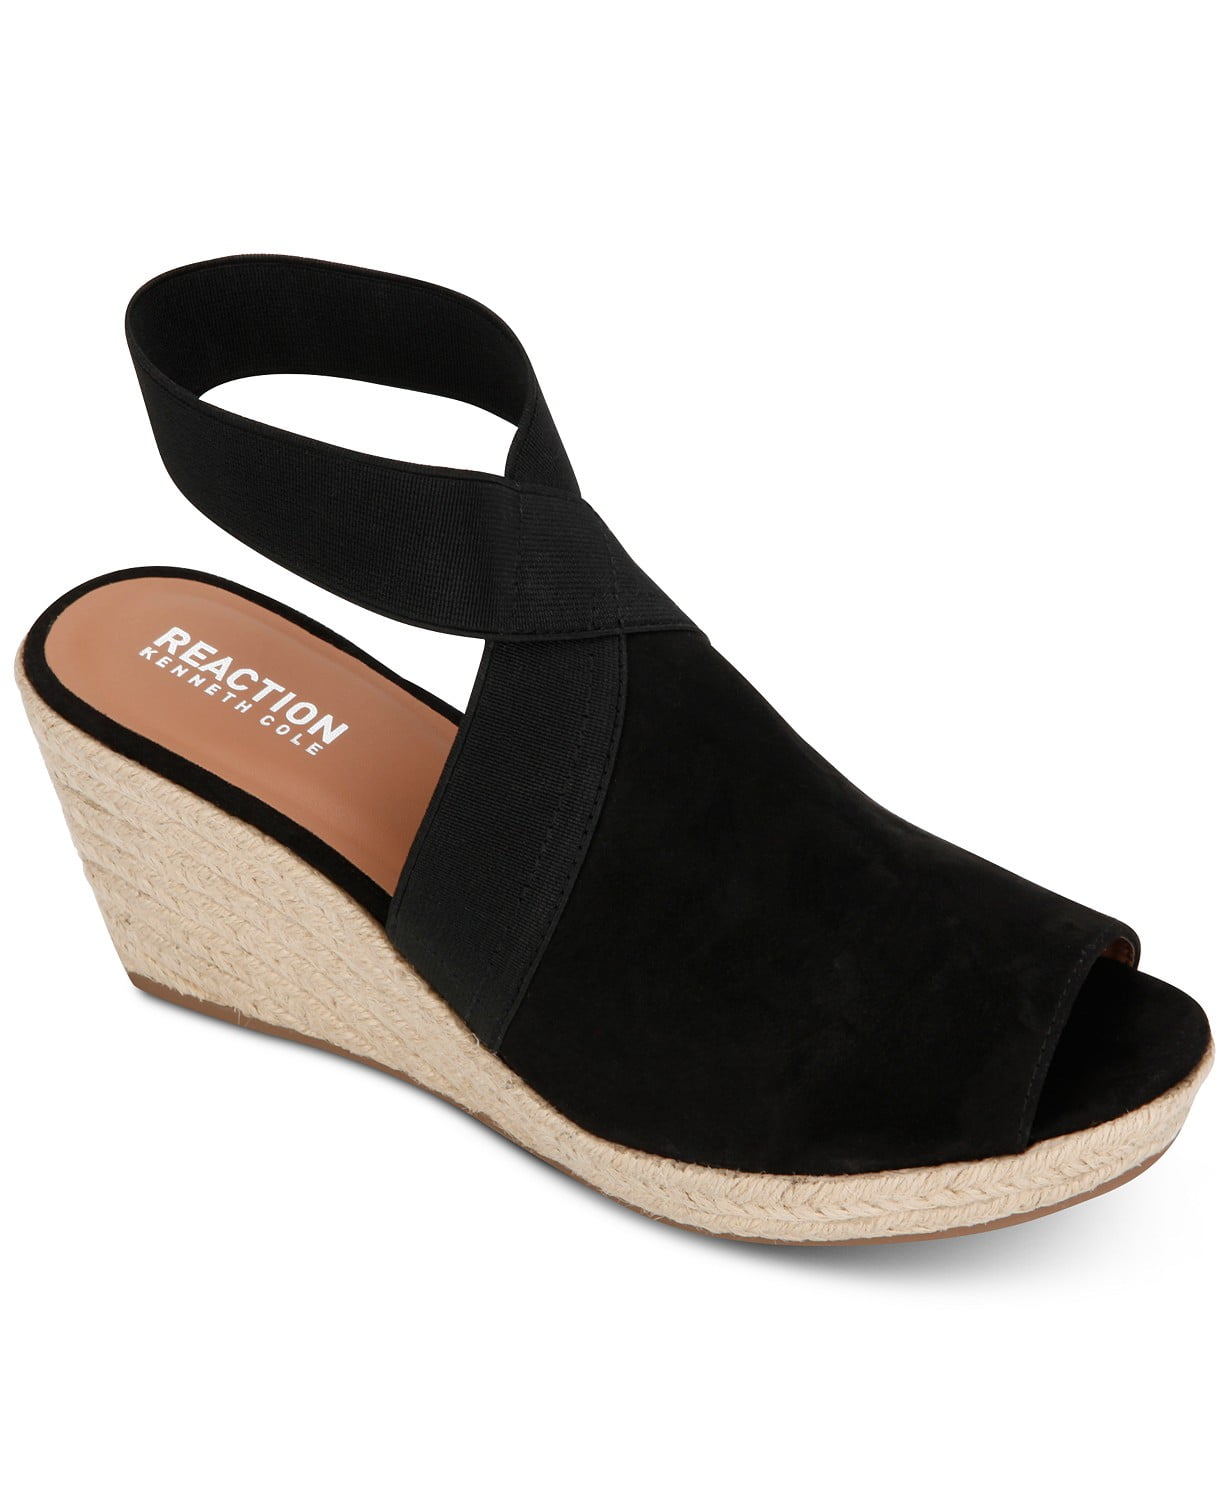 woocommerce-673321-2209615.cloudwaysapps.com-kenneth-cole-reaction-womens-black-carrie-espadrille-wedge-sandals